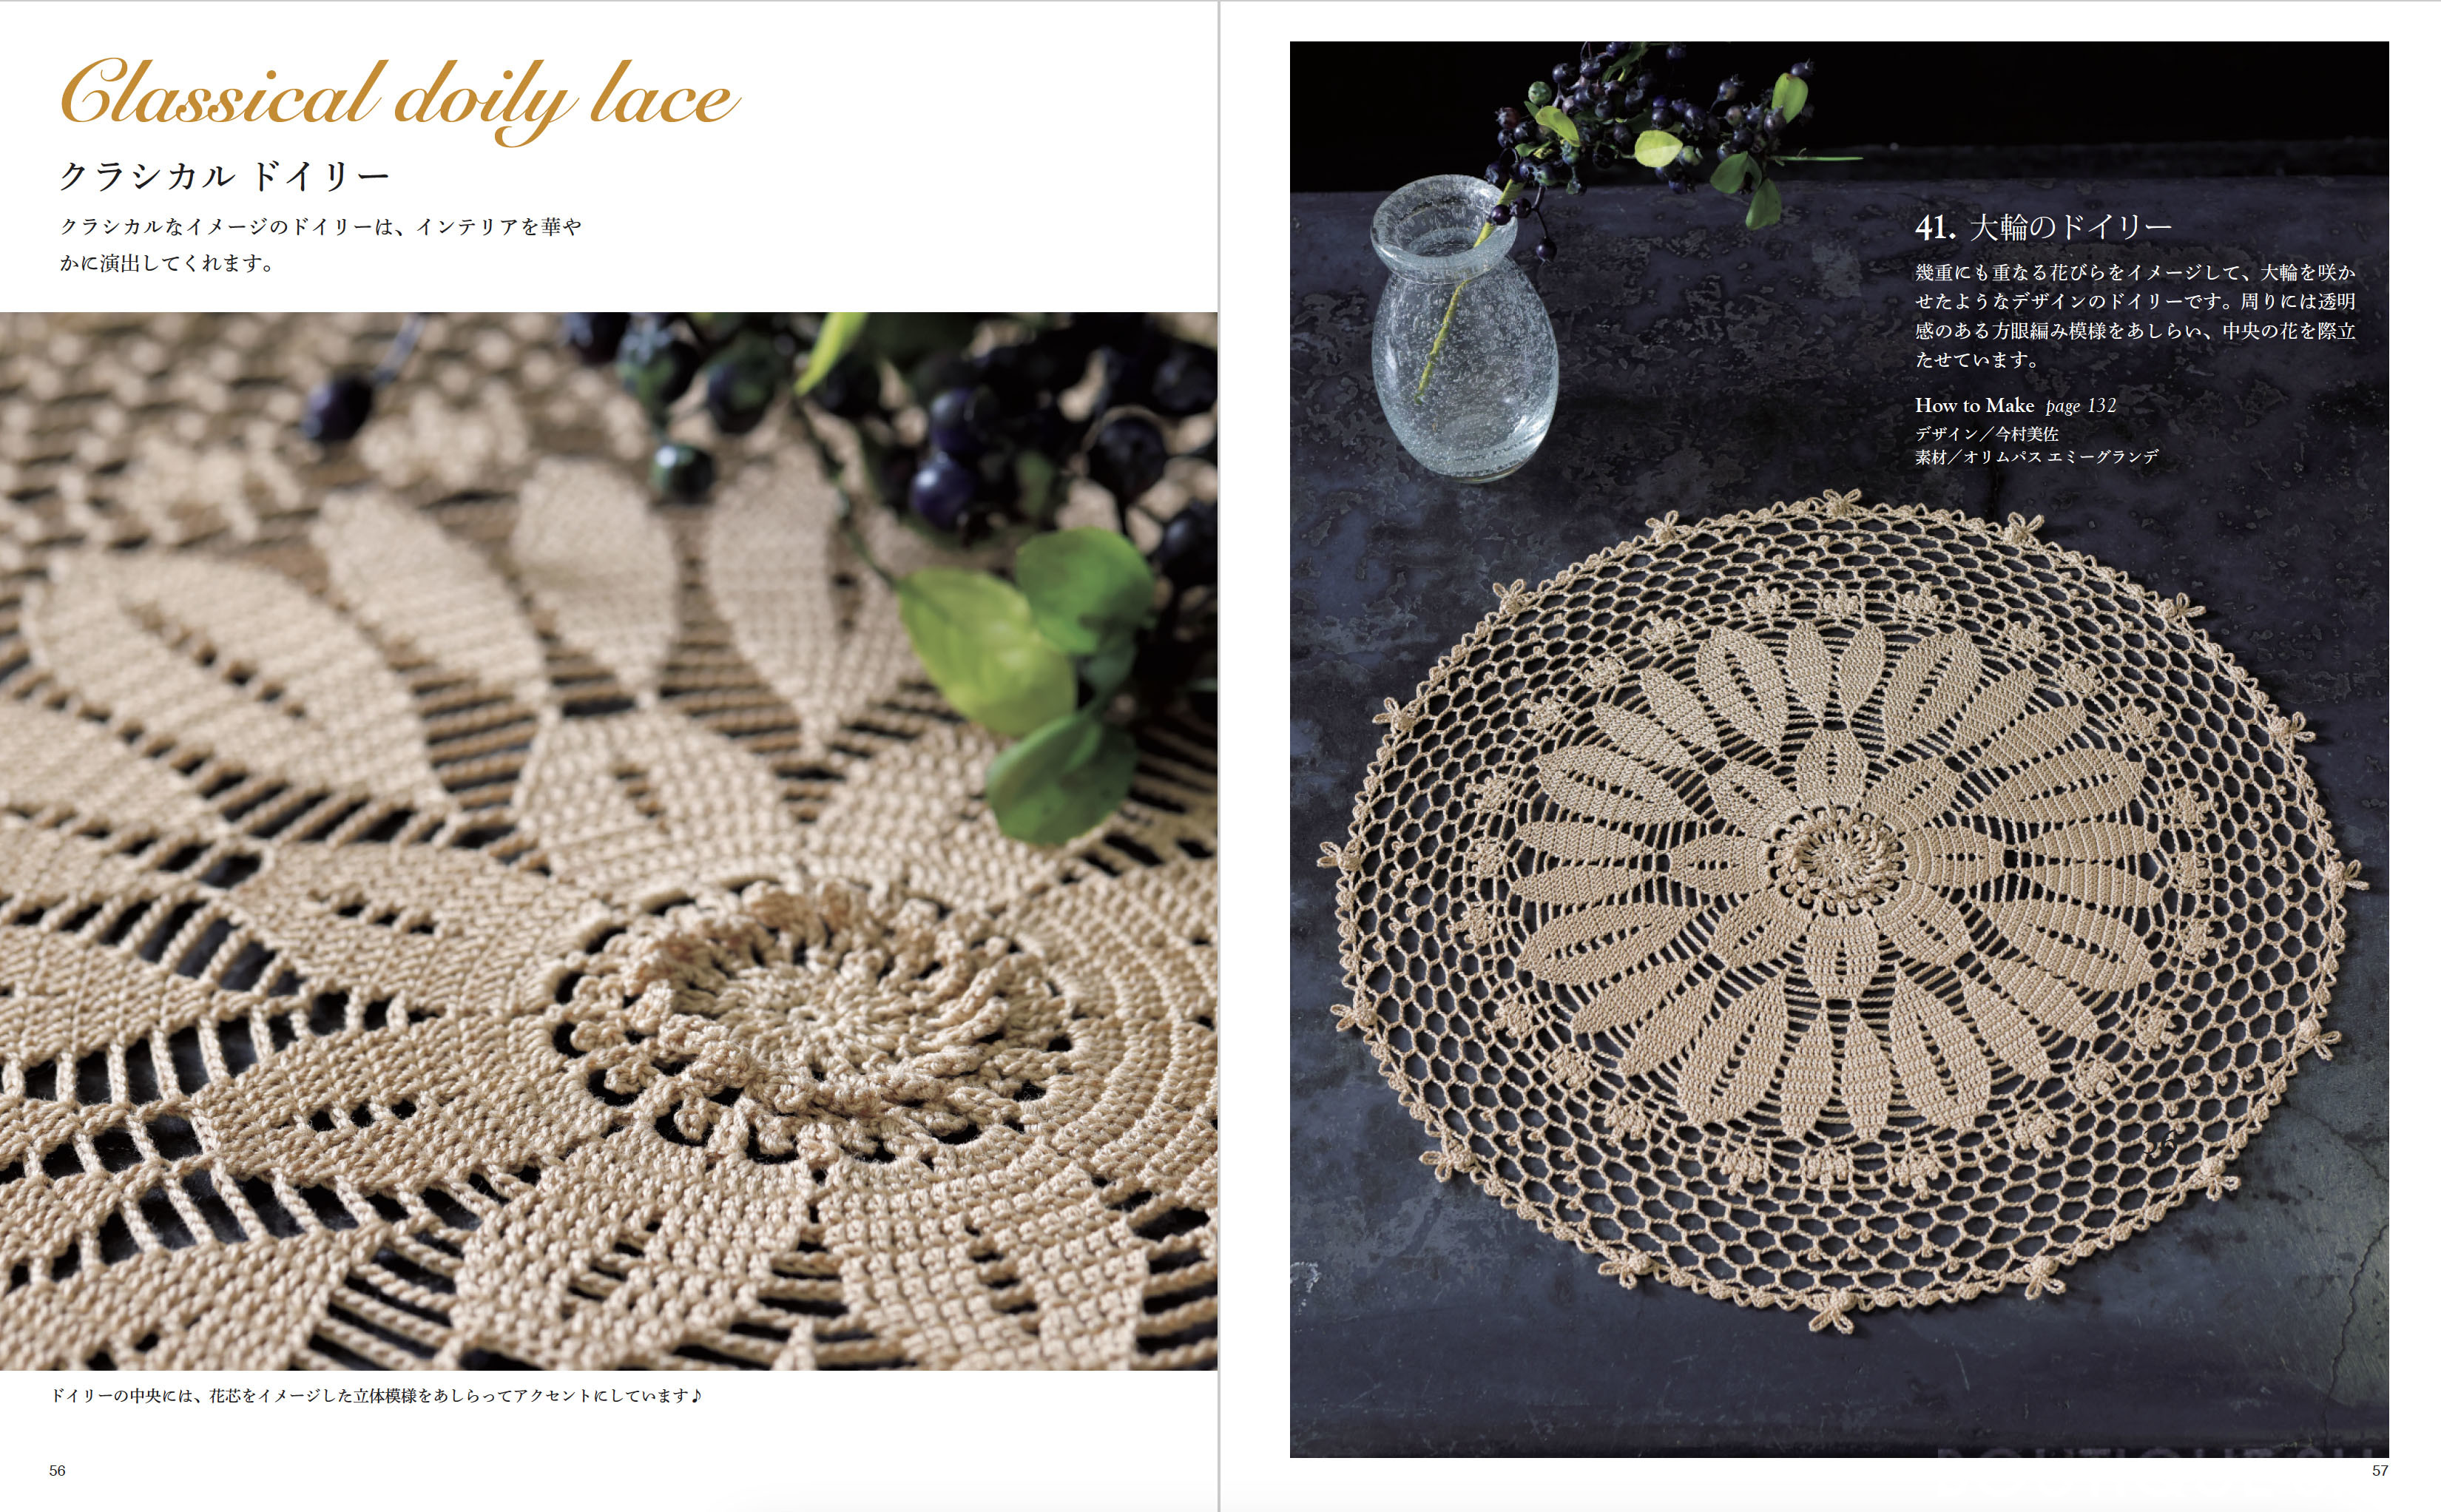 S8478 New Edition)lacework Doily Table Centers & Accessories(book 